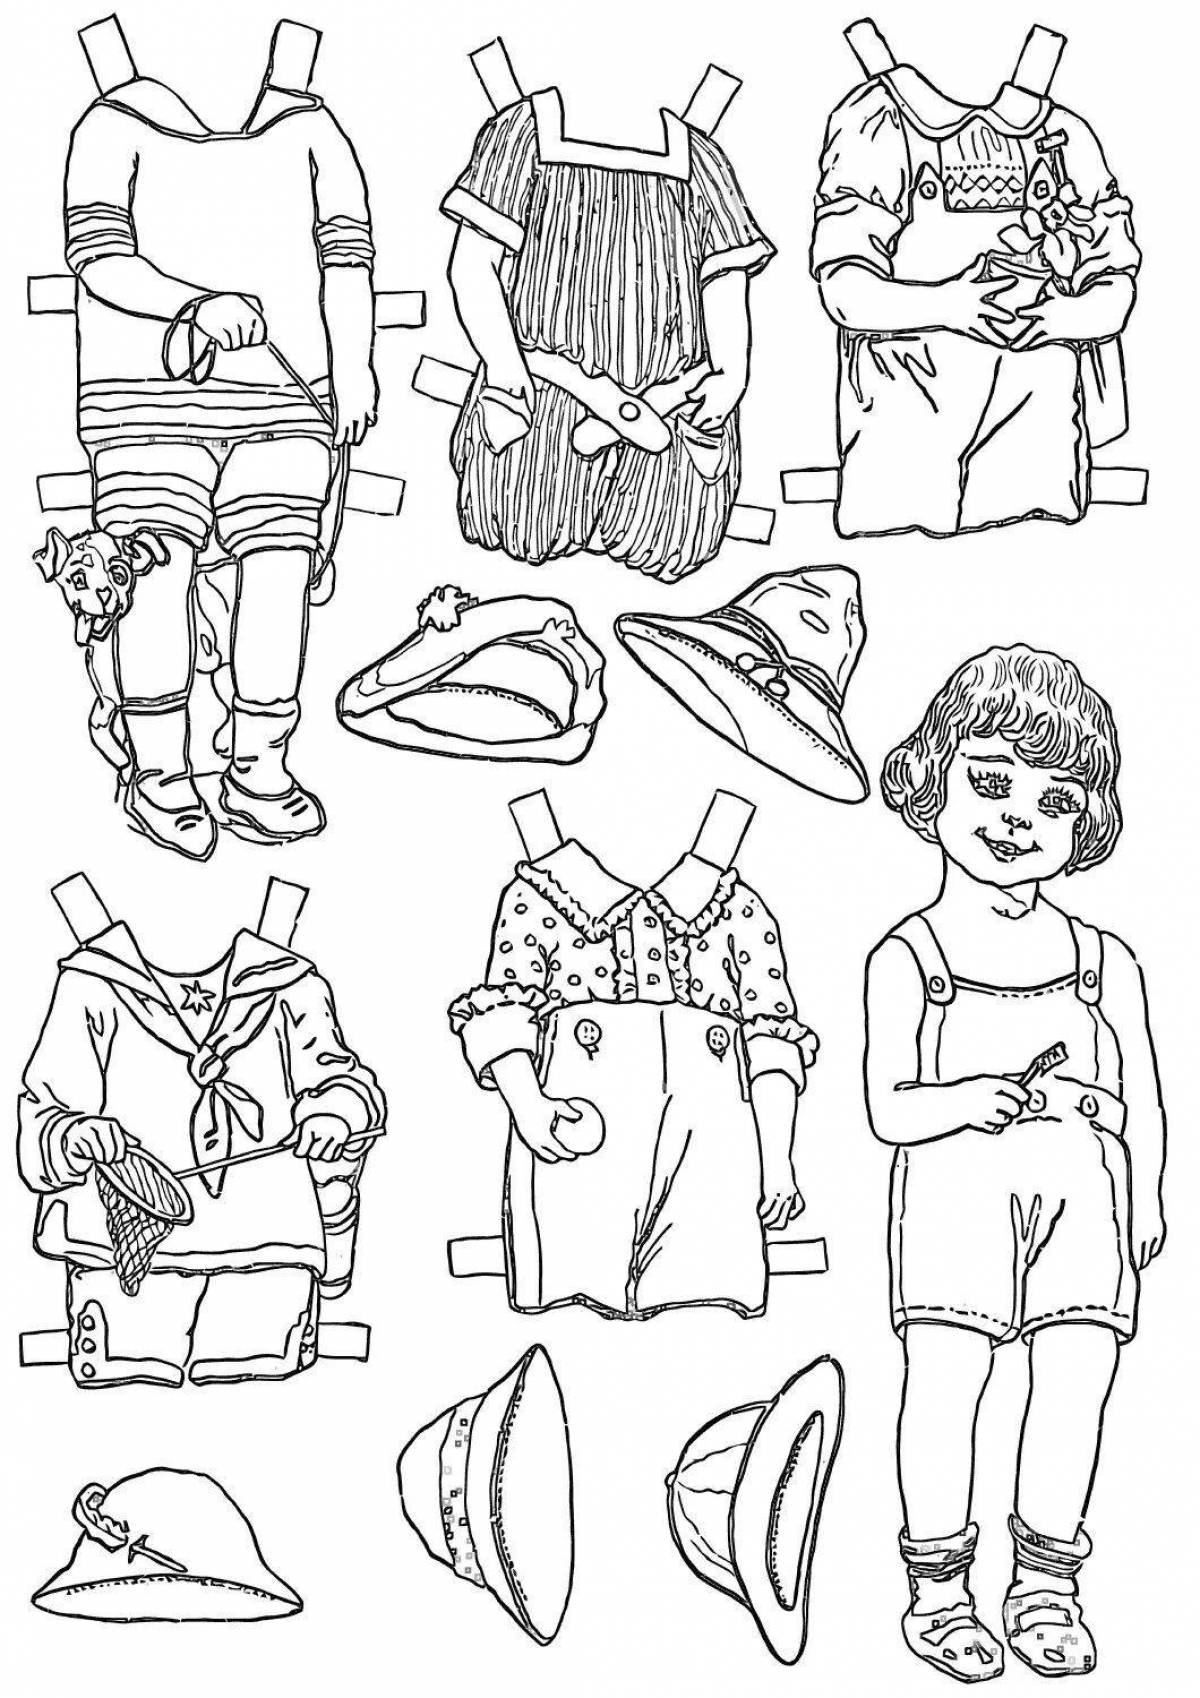 Humorous coloring book boy in clothes